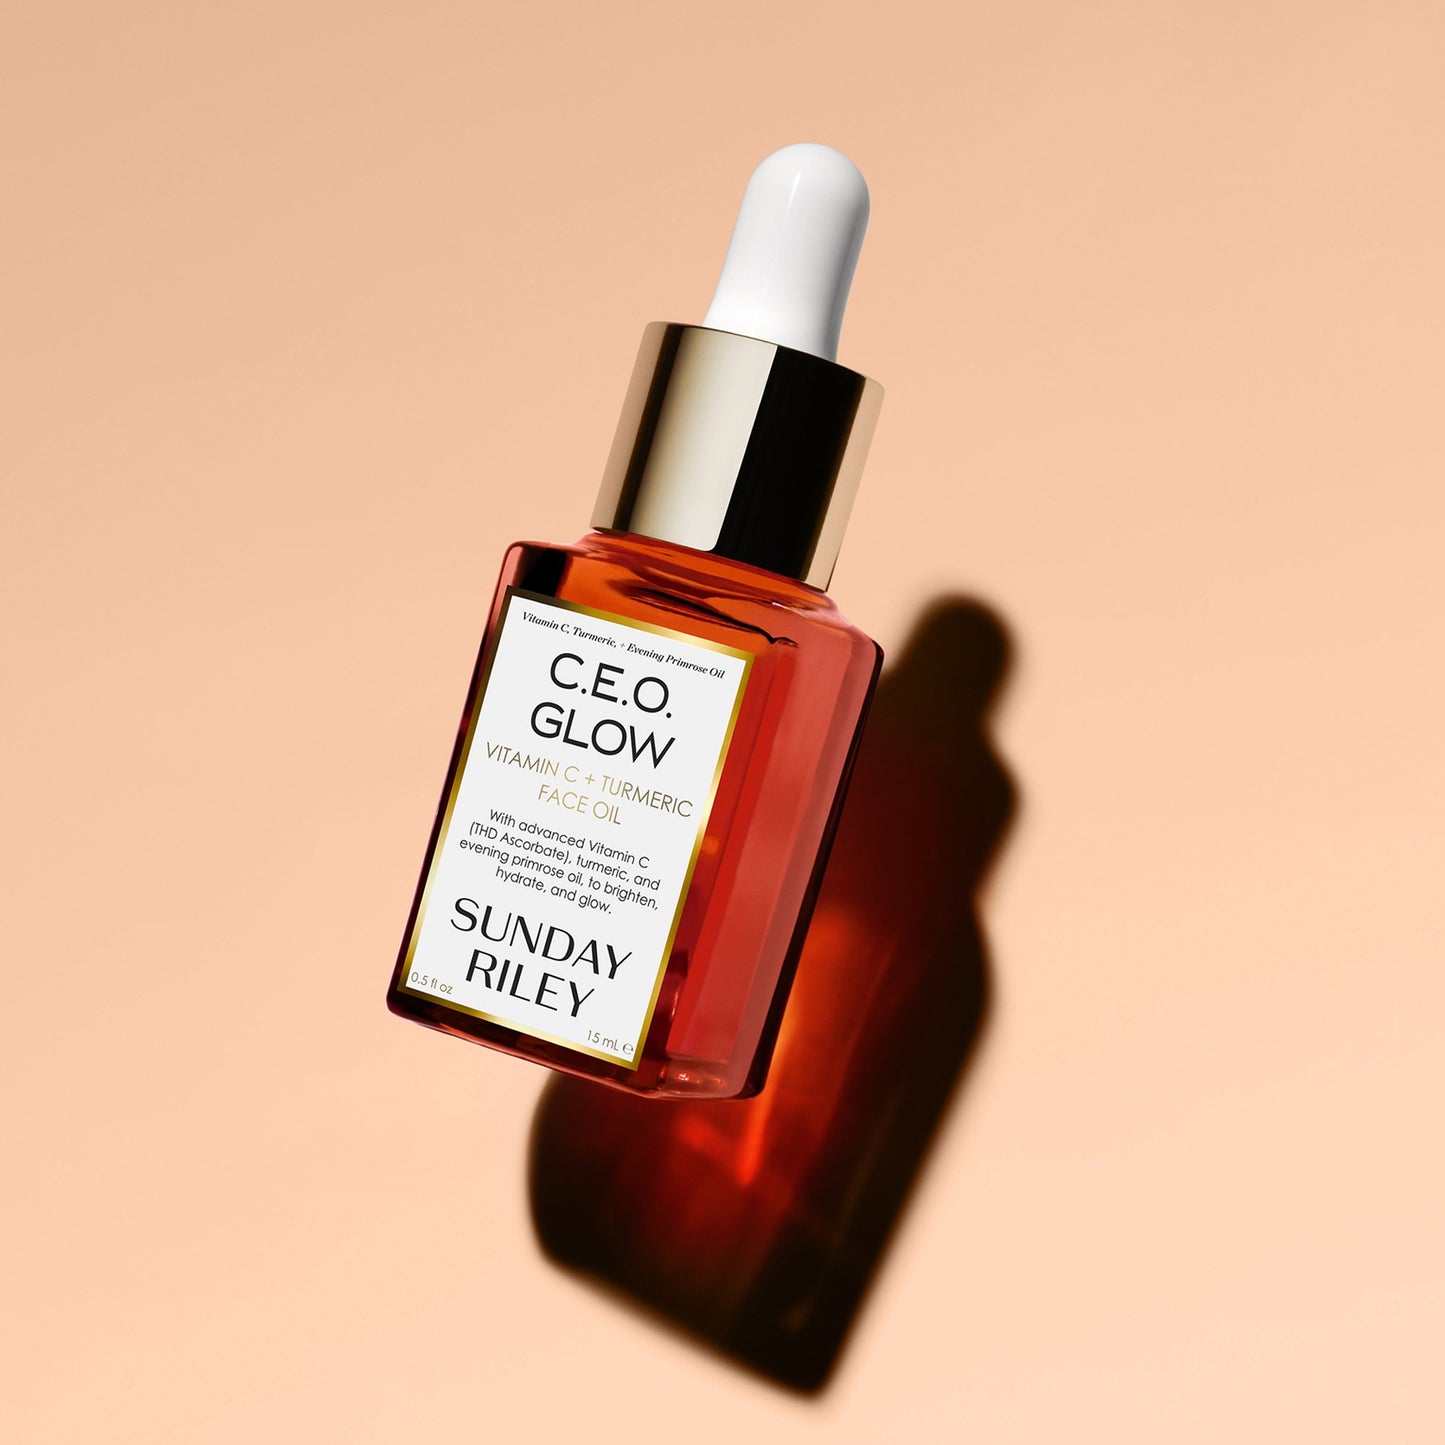 Lay down of C.E.O. Glow Face Oil bottle with shadow on a peach background